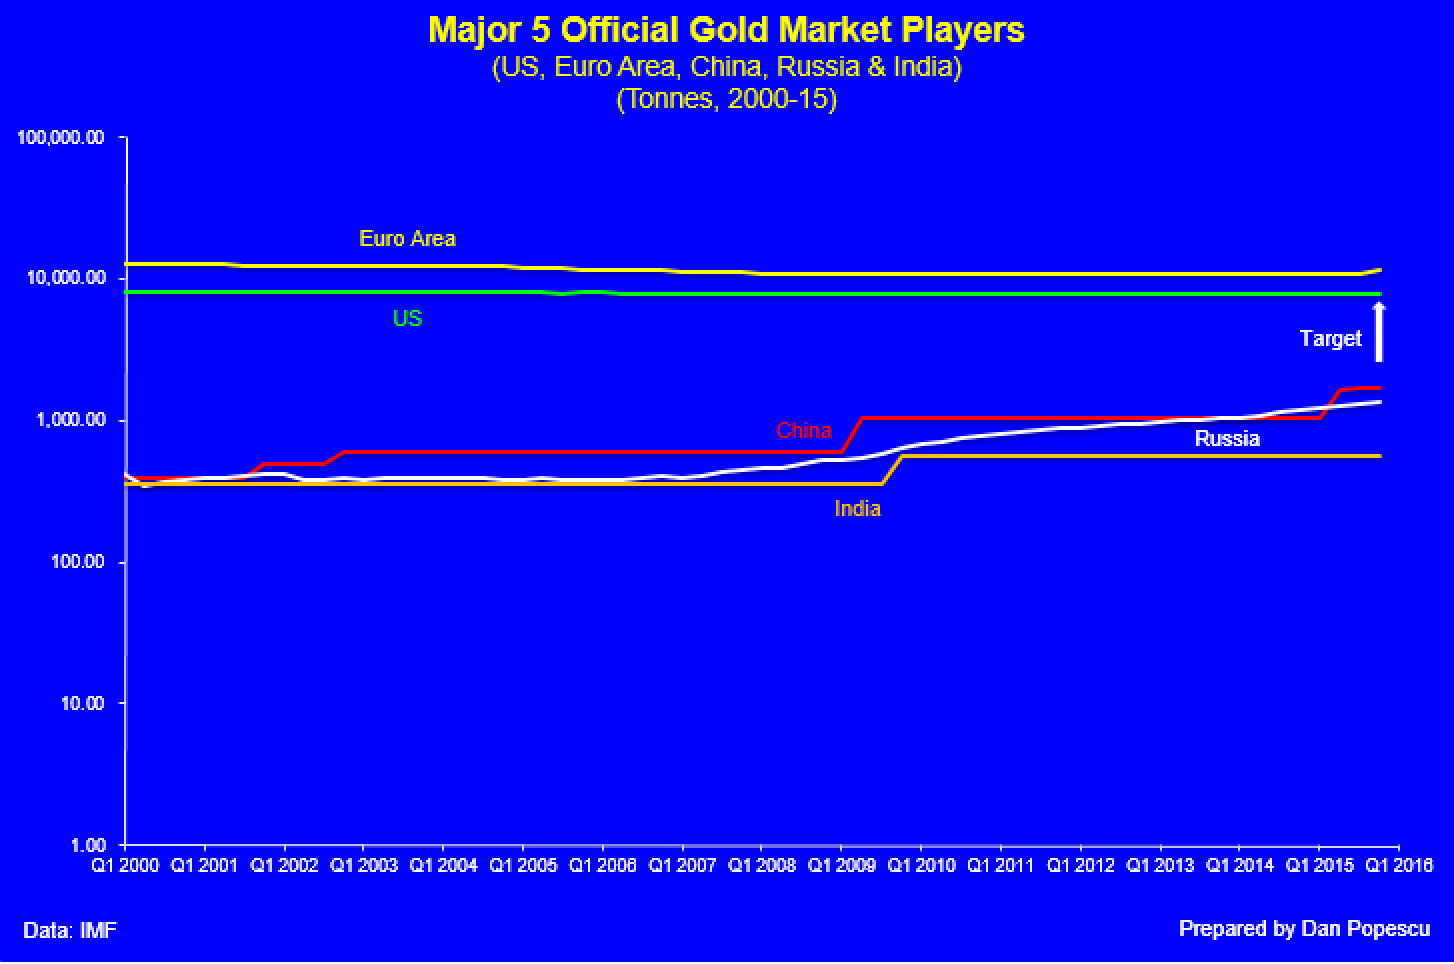 Major 5 official gold market players 